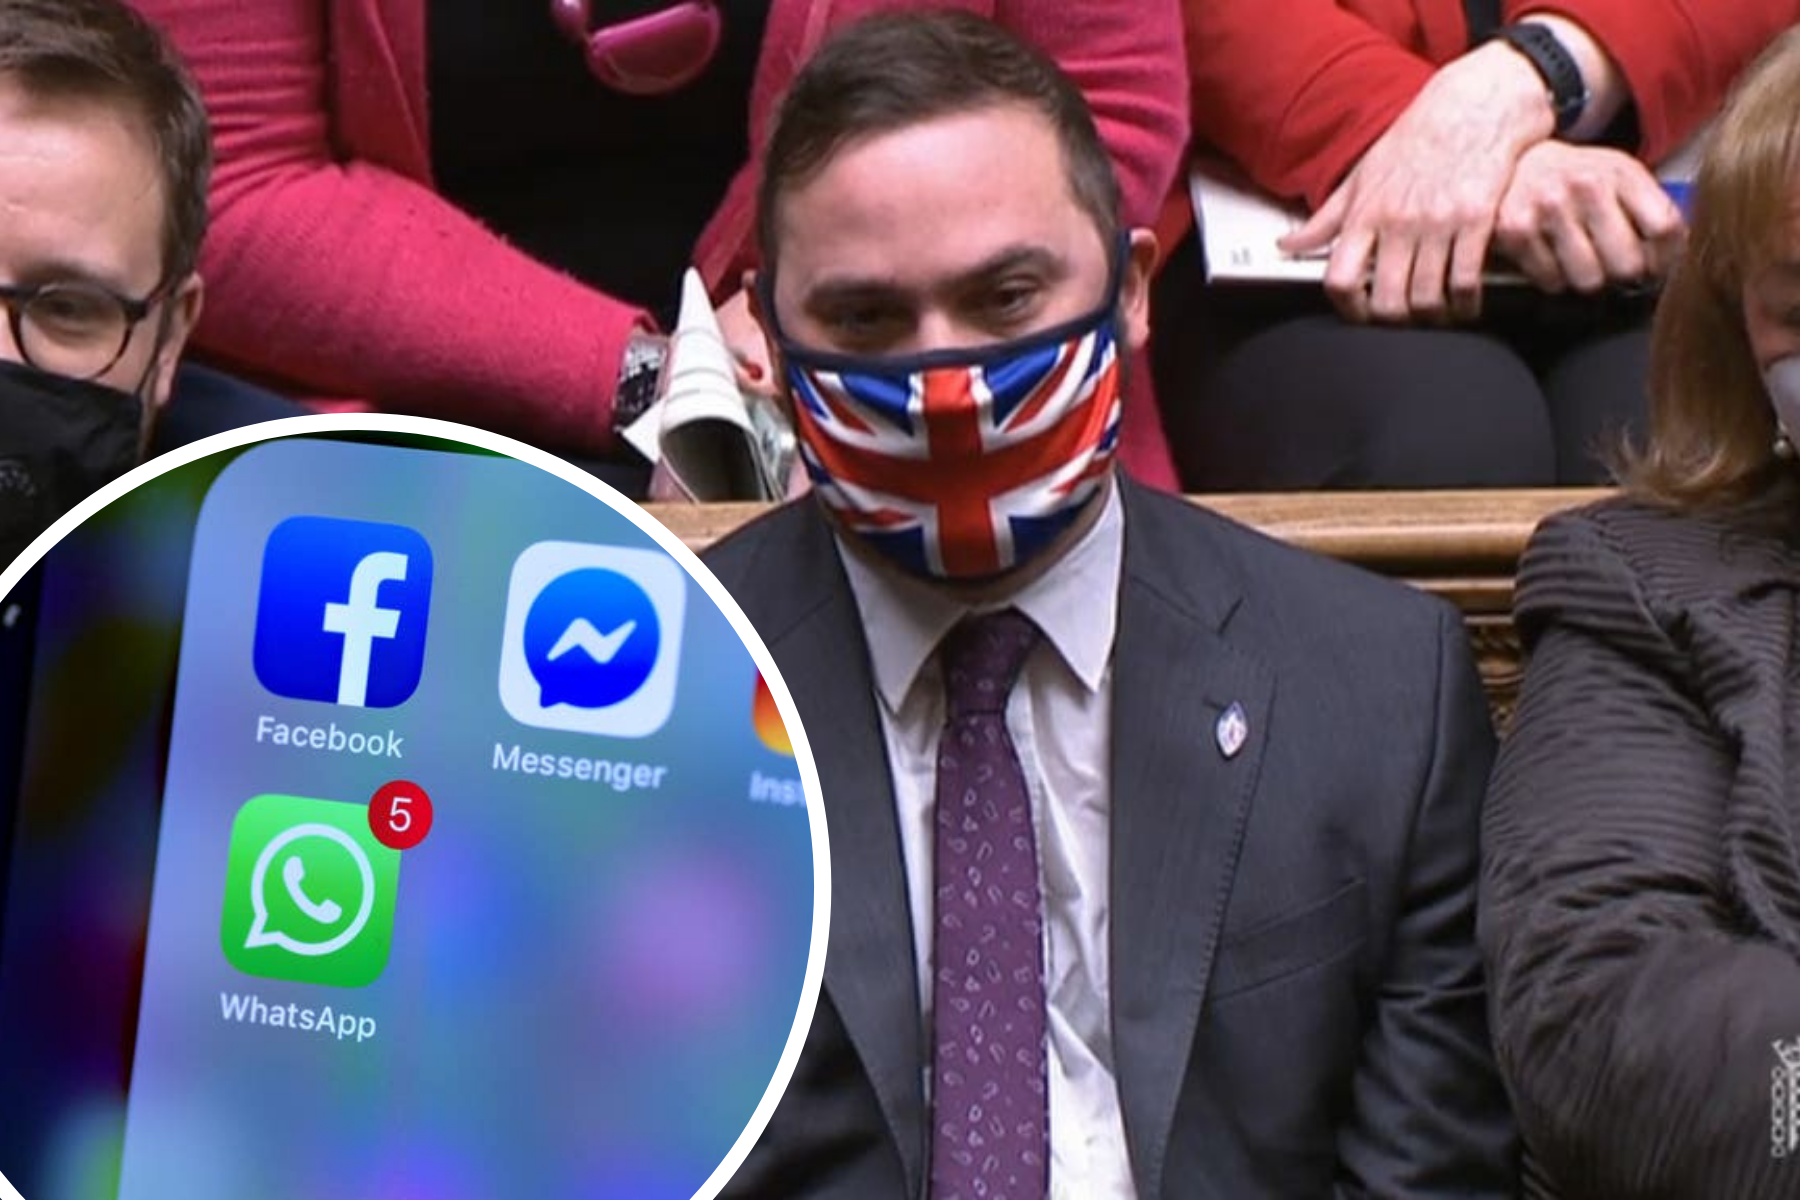 Christian Wakeford removed from Conservative WhatsApp group after joining Labour